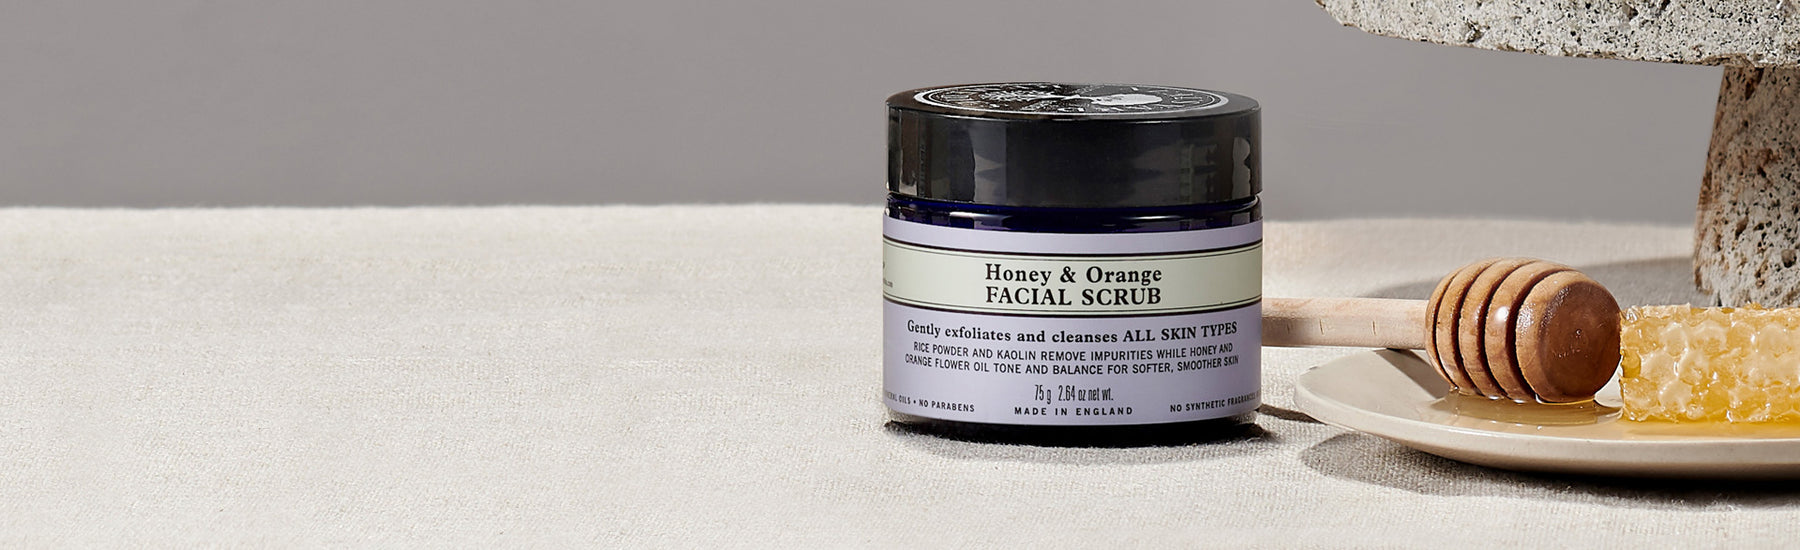 Picture of the Honey & Orange Facial Scrub by Neal's yard Remedies